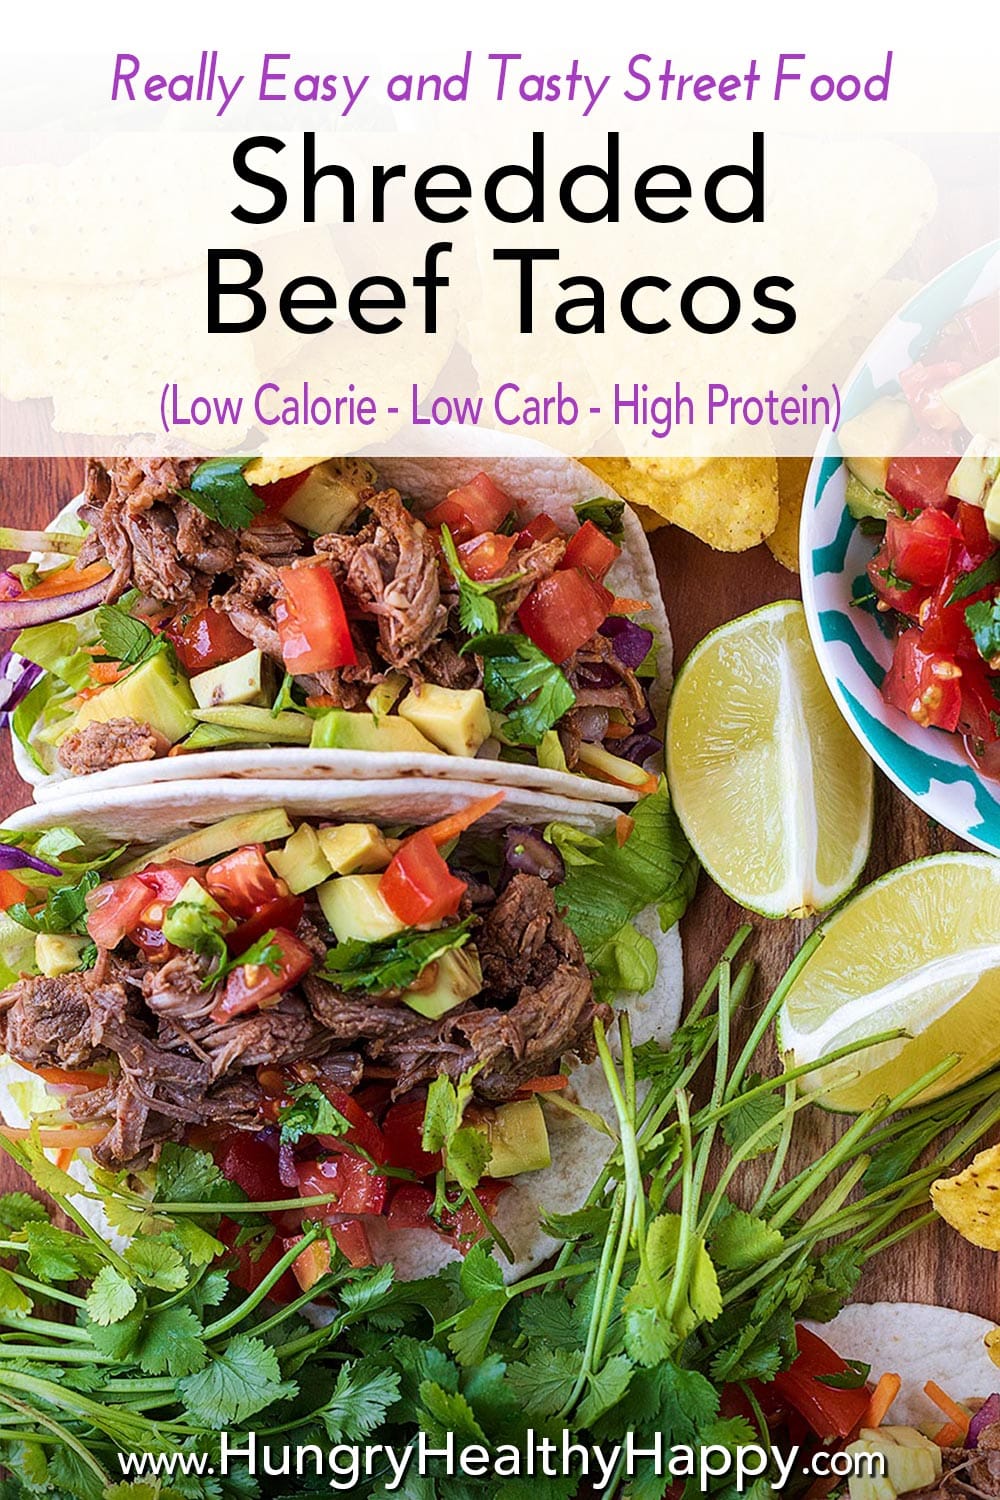 Shredded Beef Tacos - Hungry Healthy Happy